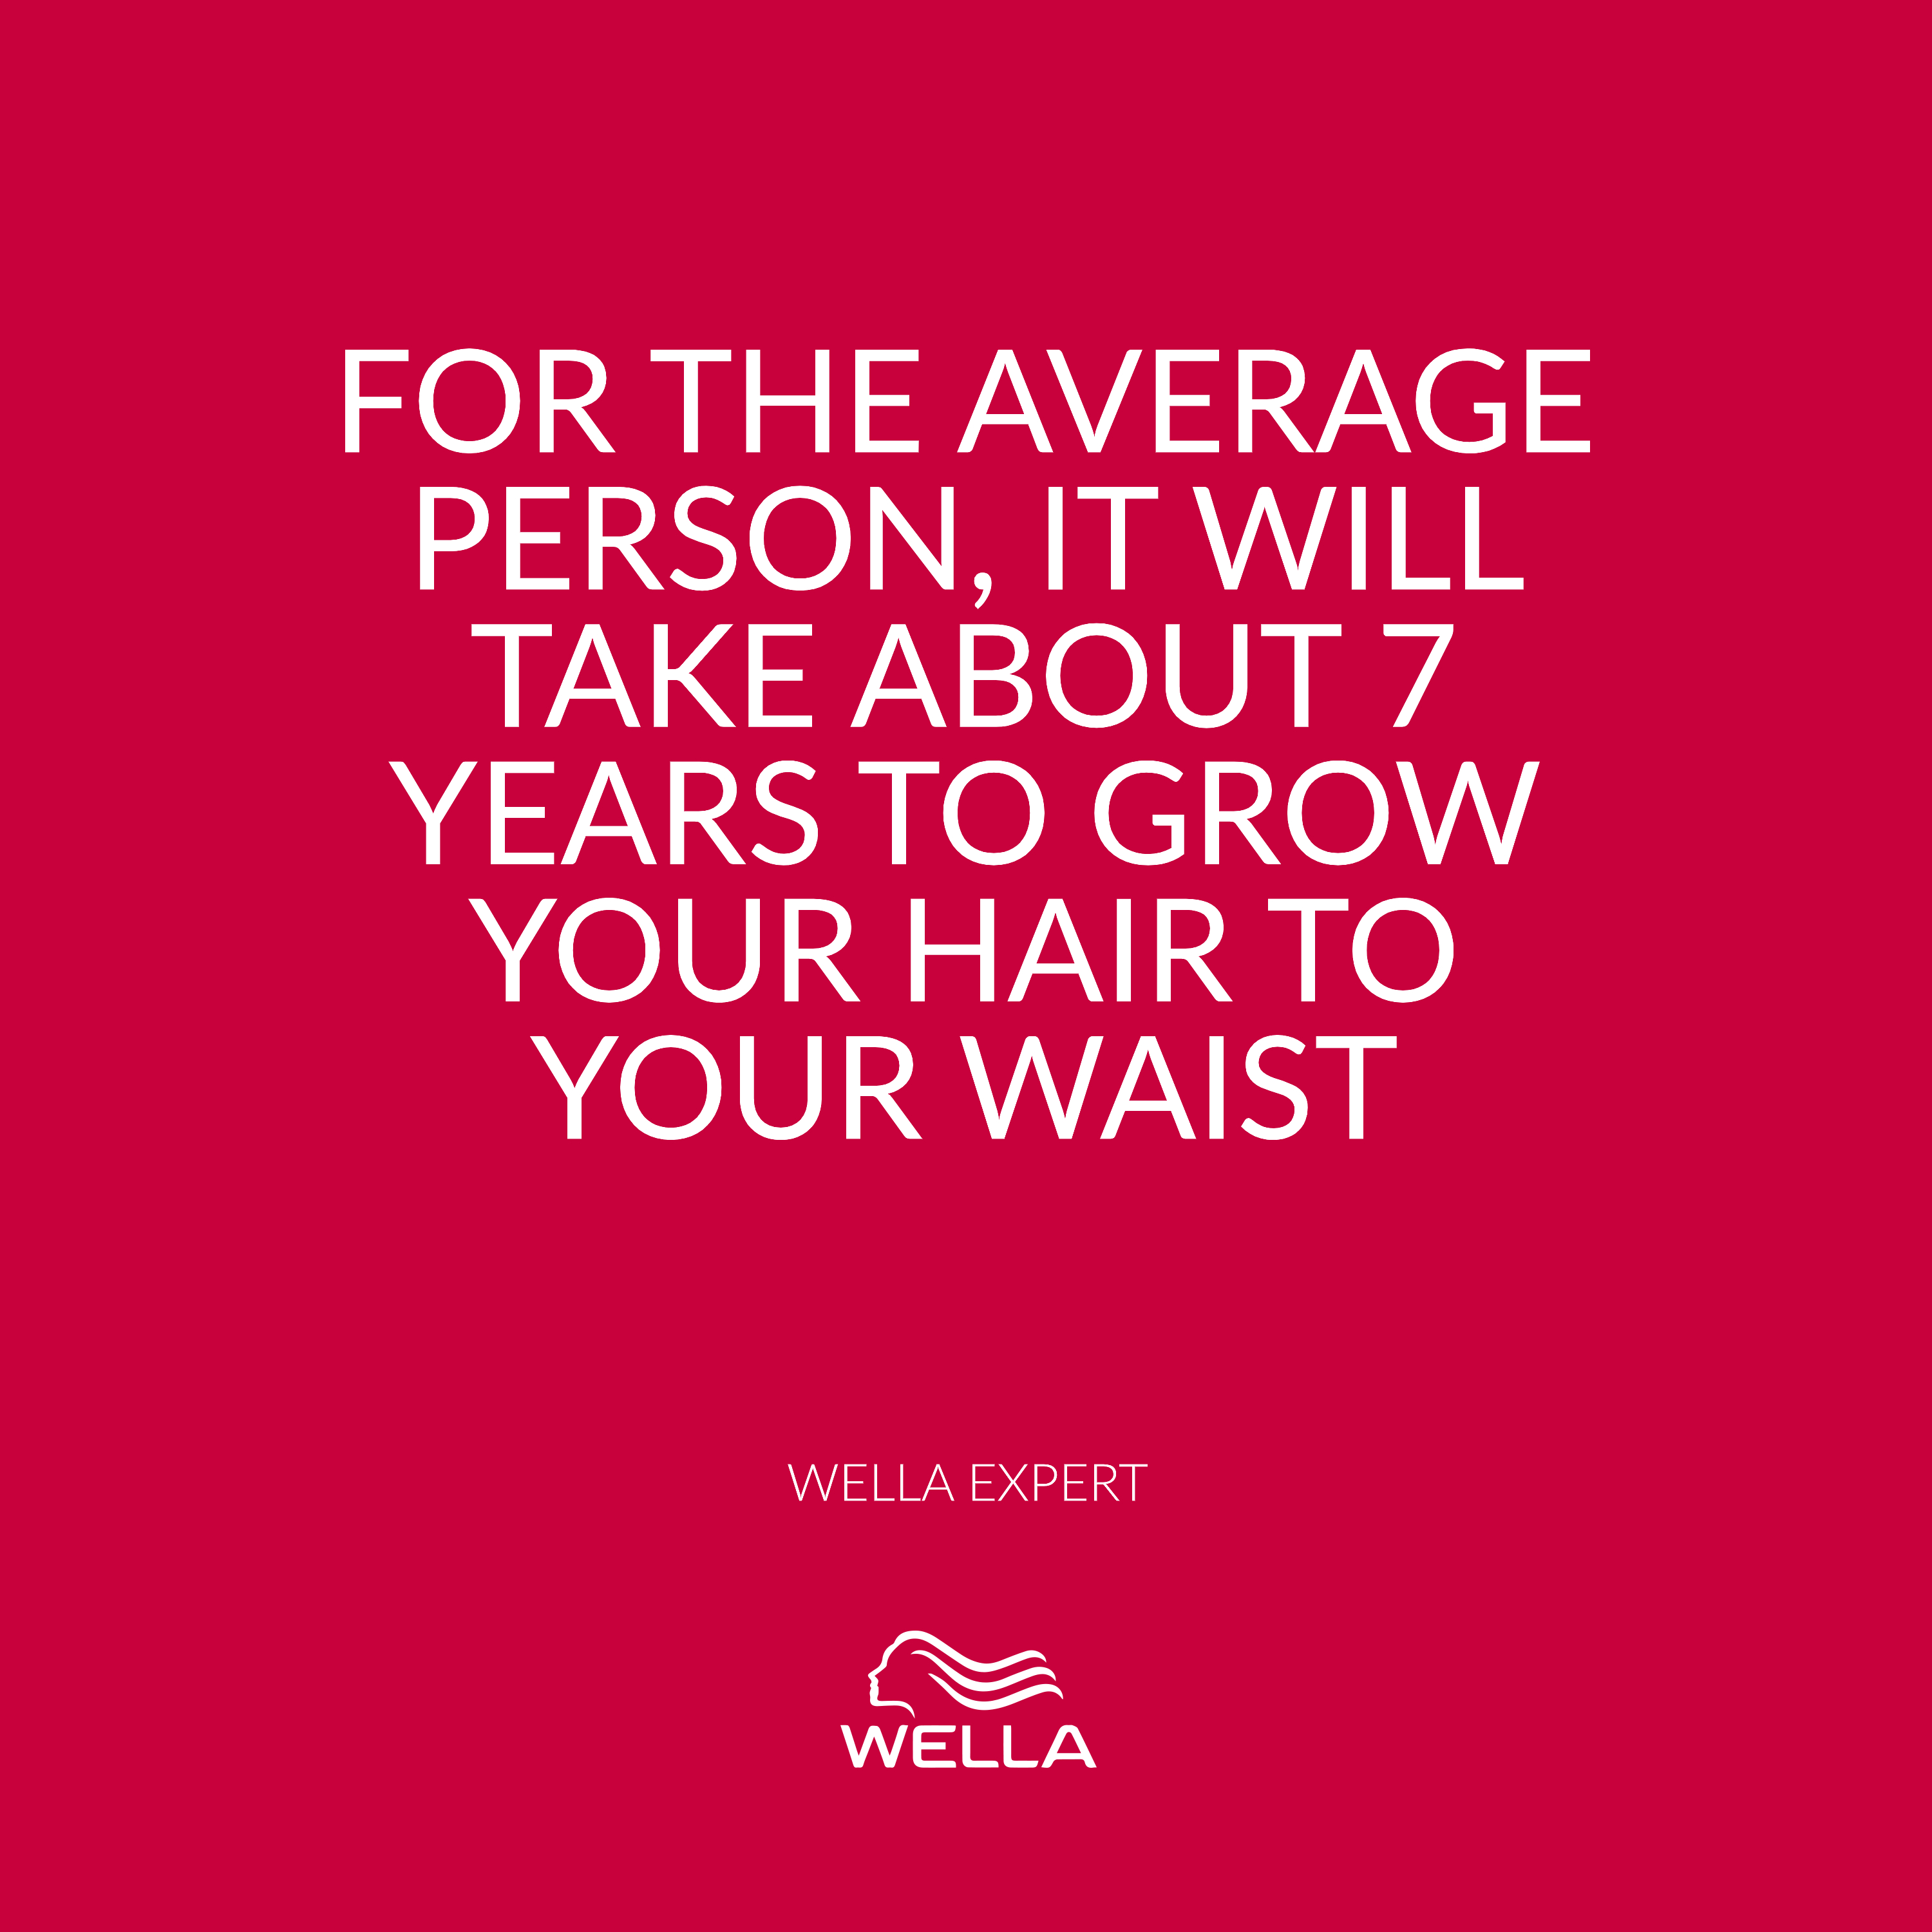 20 totally interesting hair facts | Wella